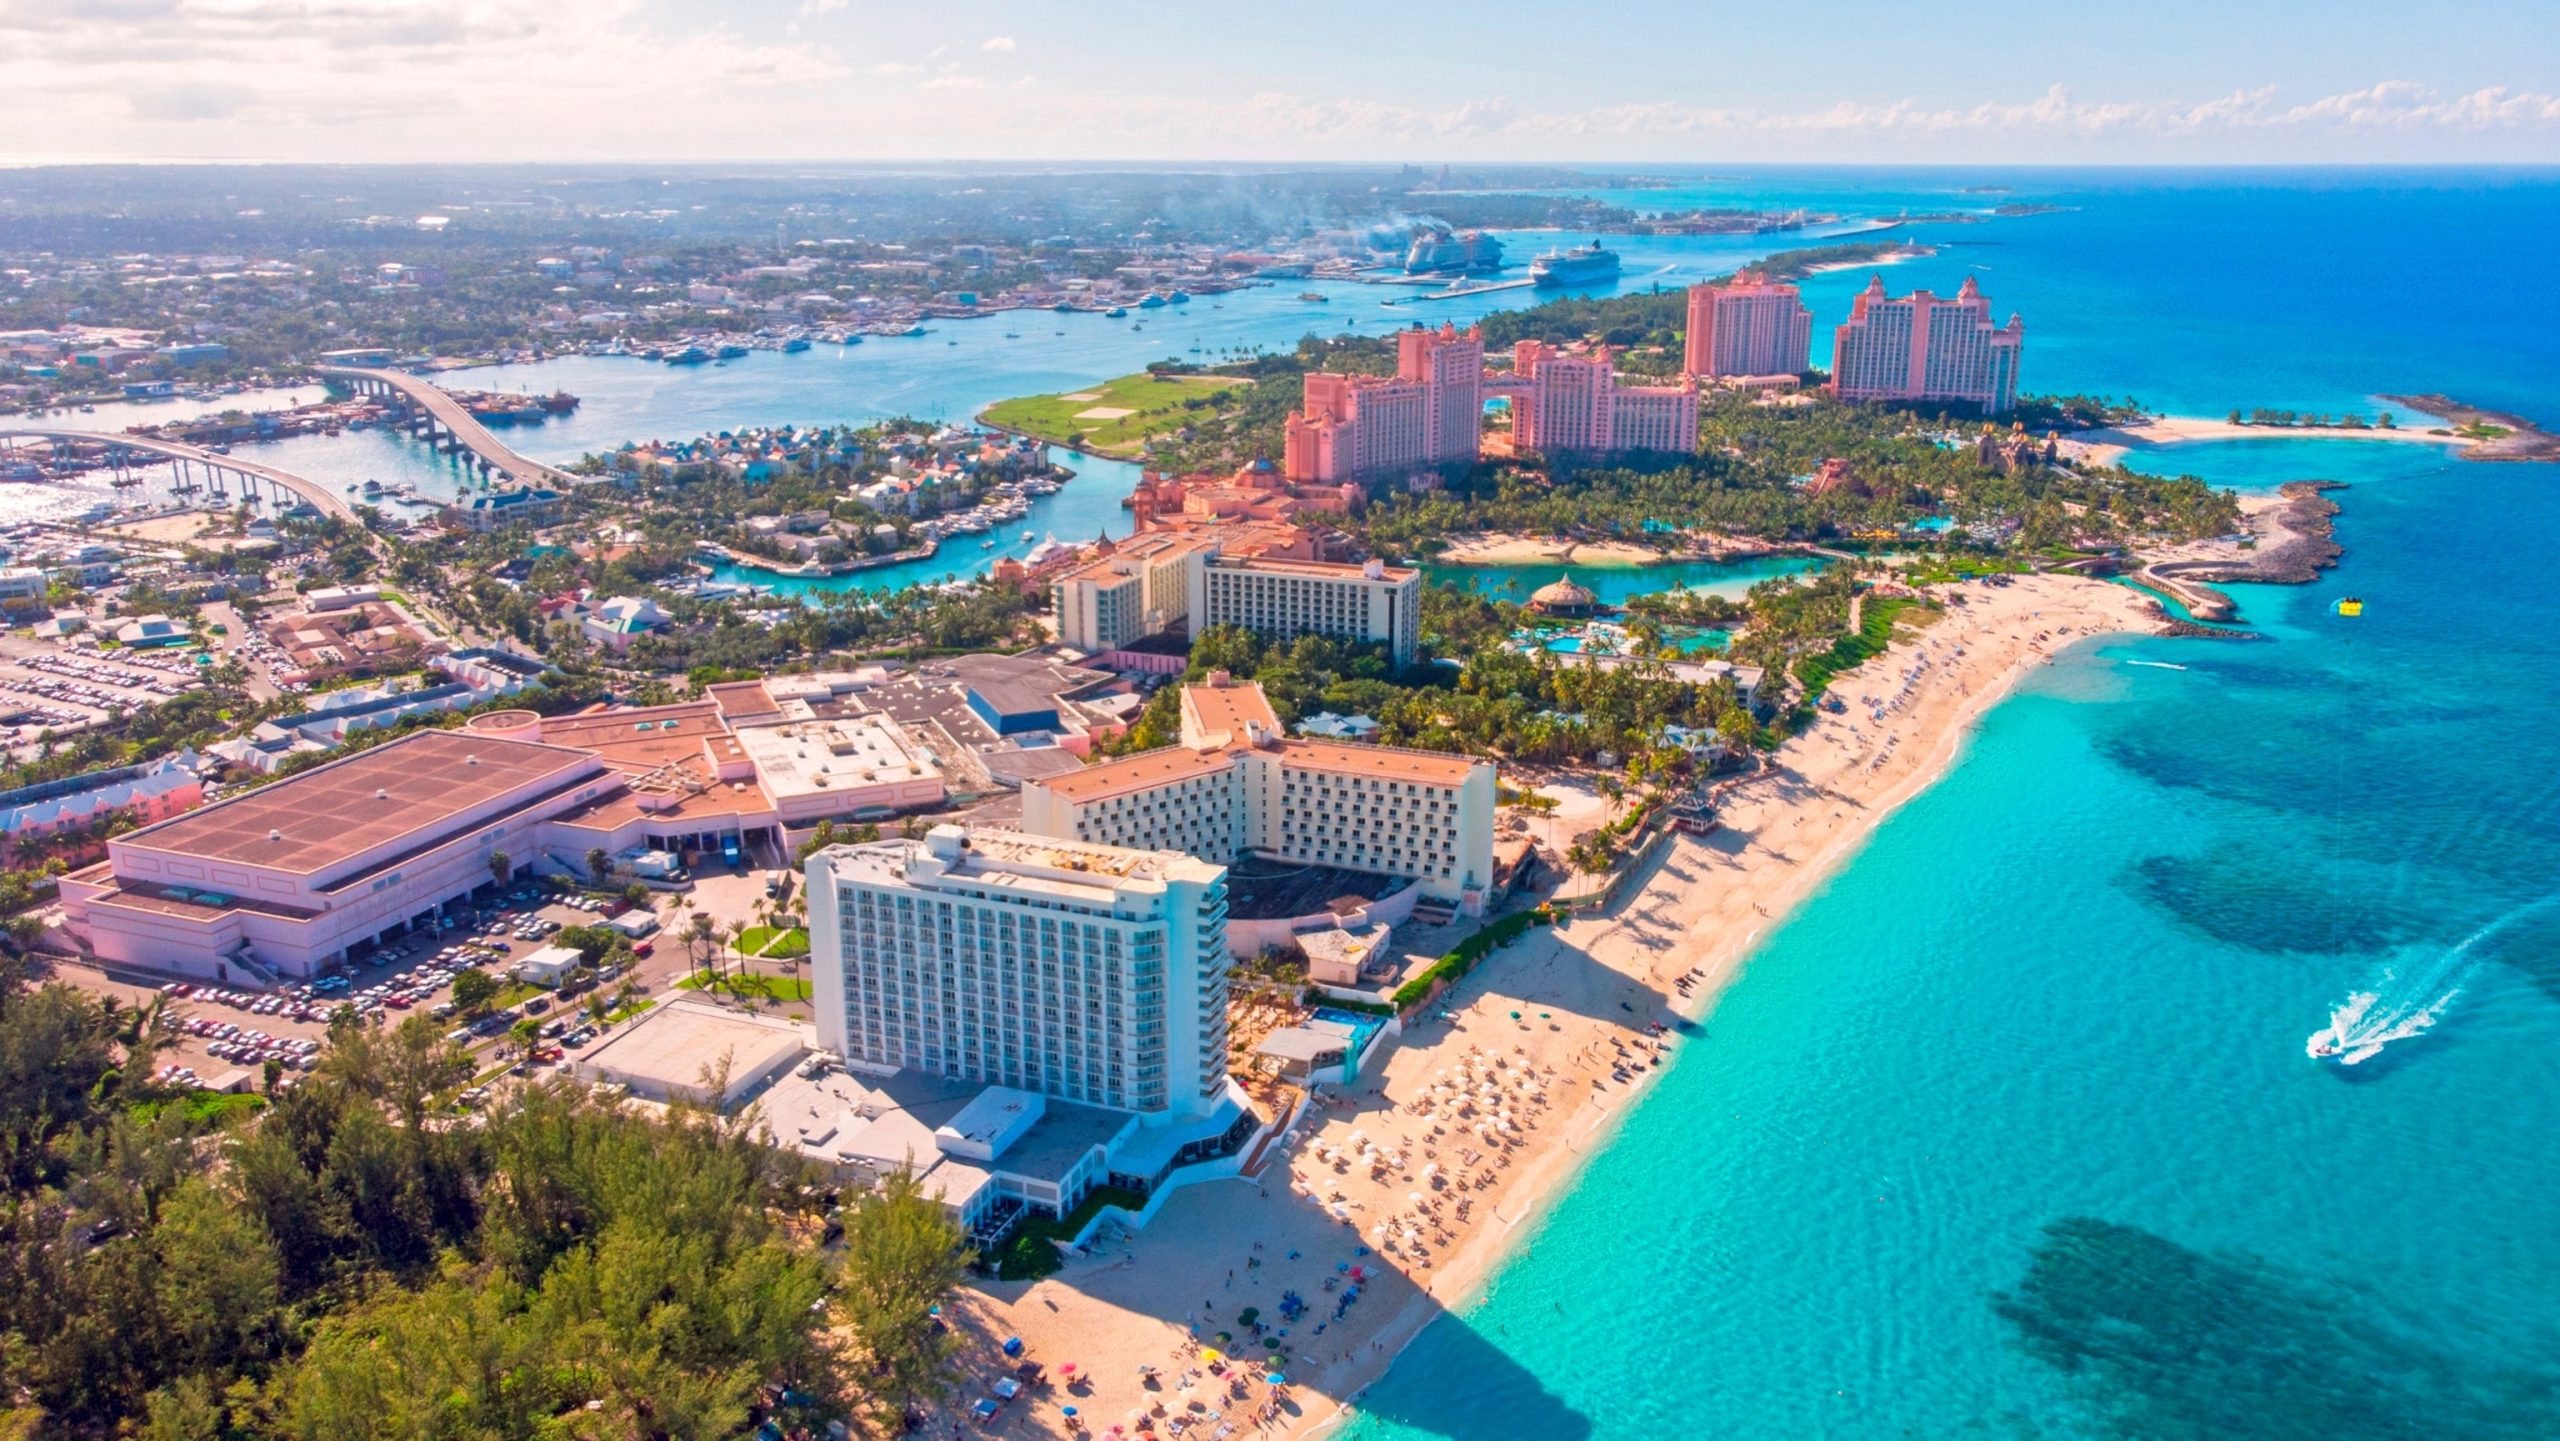 Police report: 10-year-old boy allegedly attacked by shark at Bahamas resort